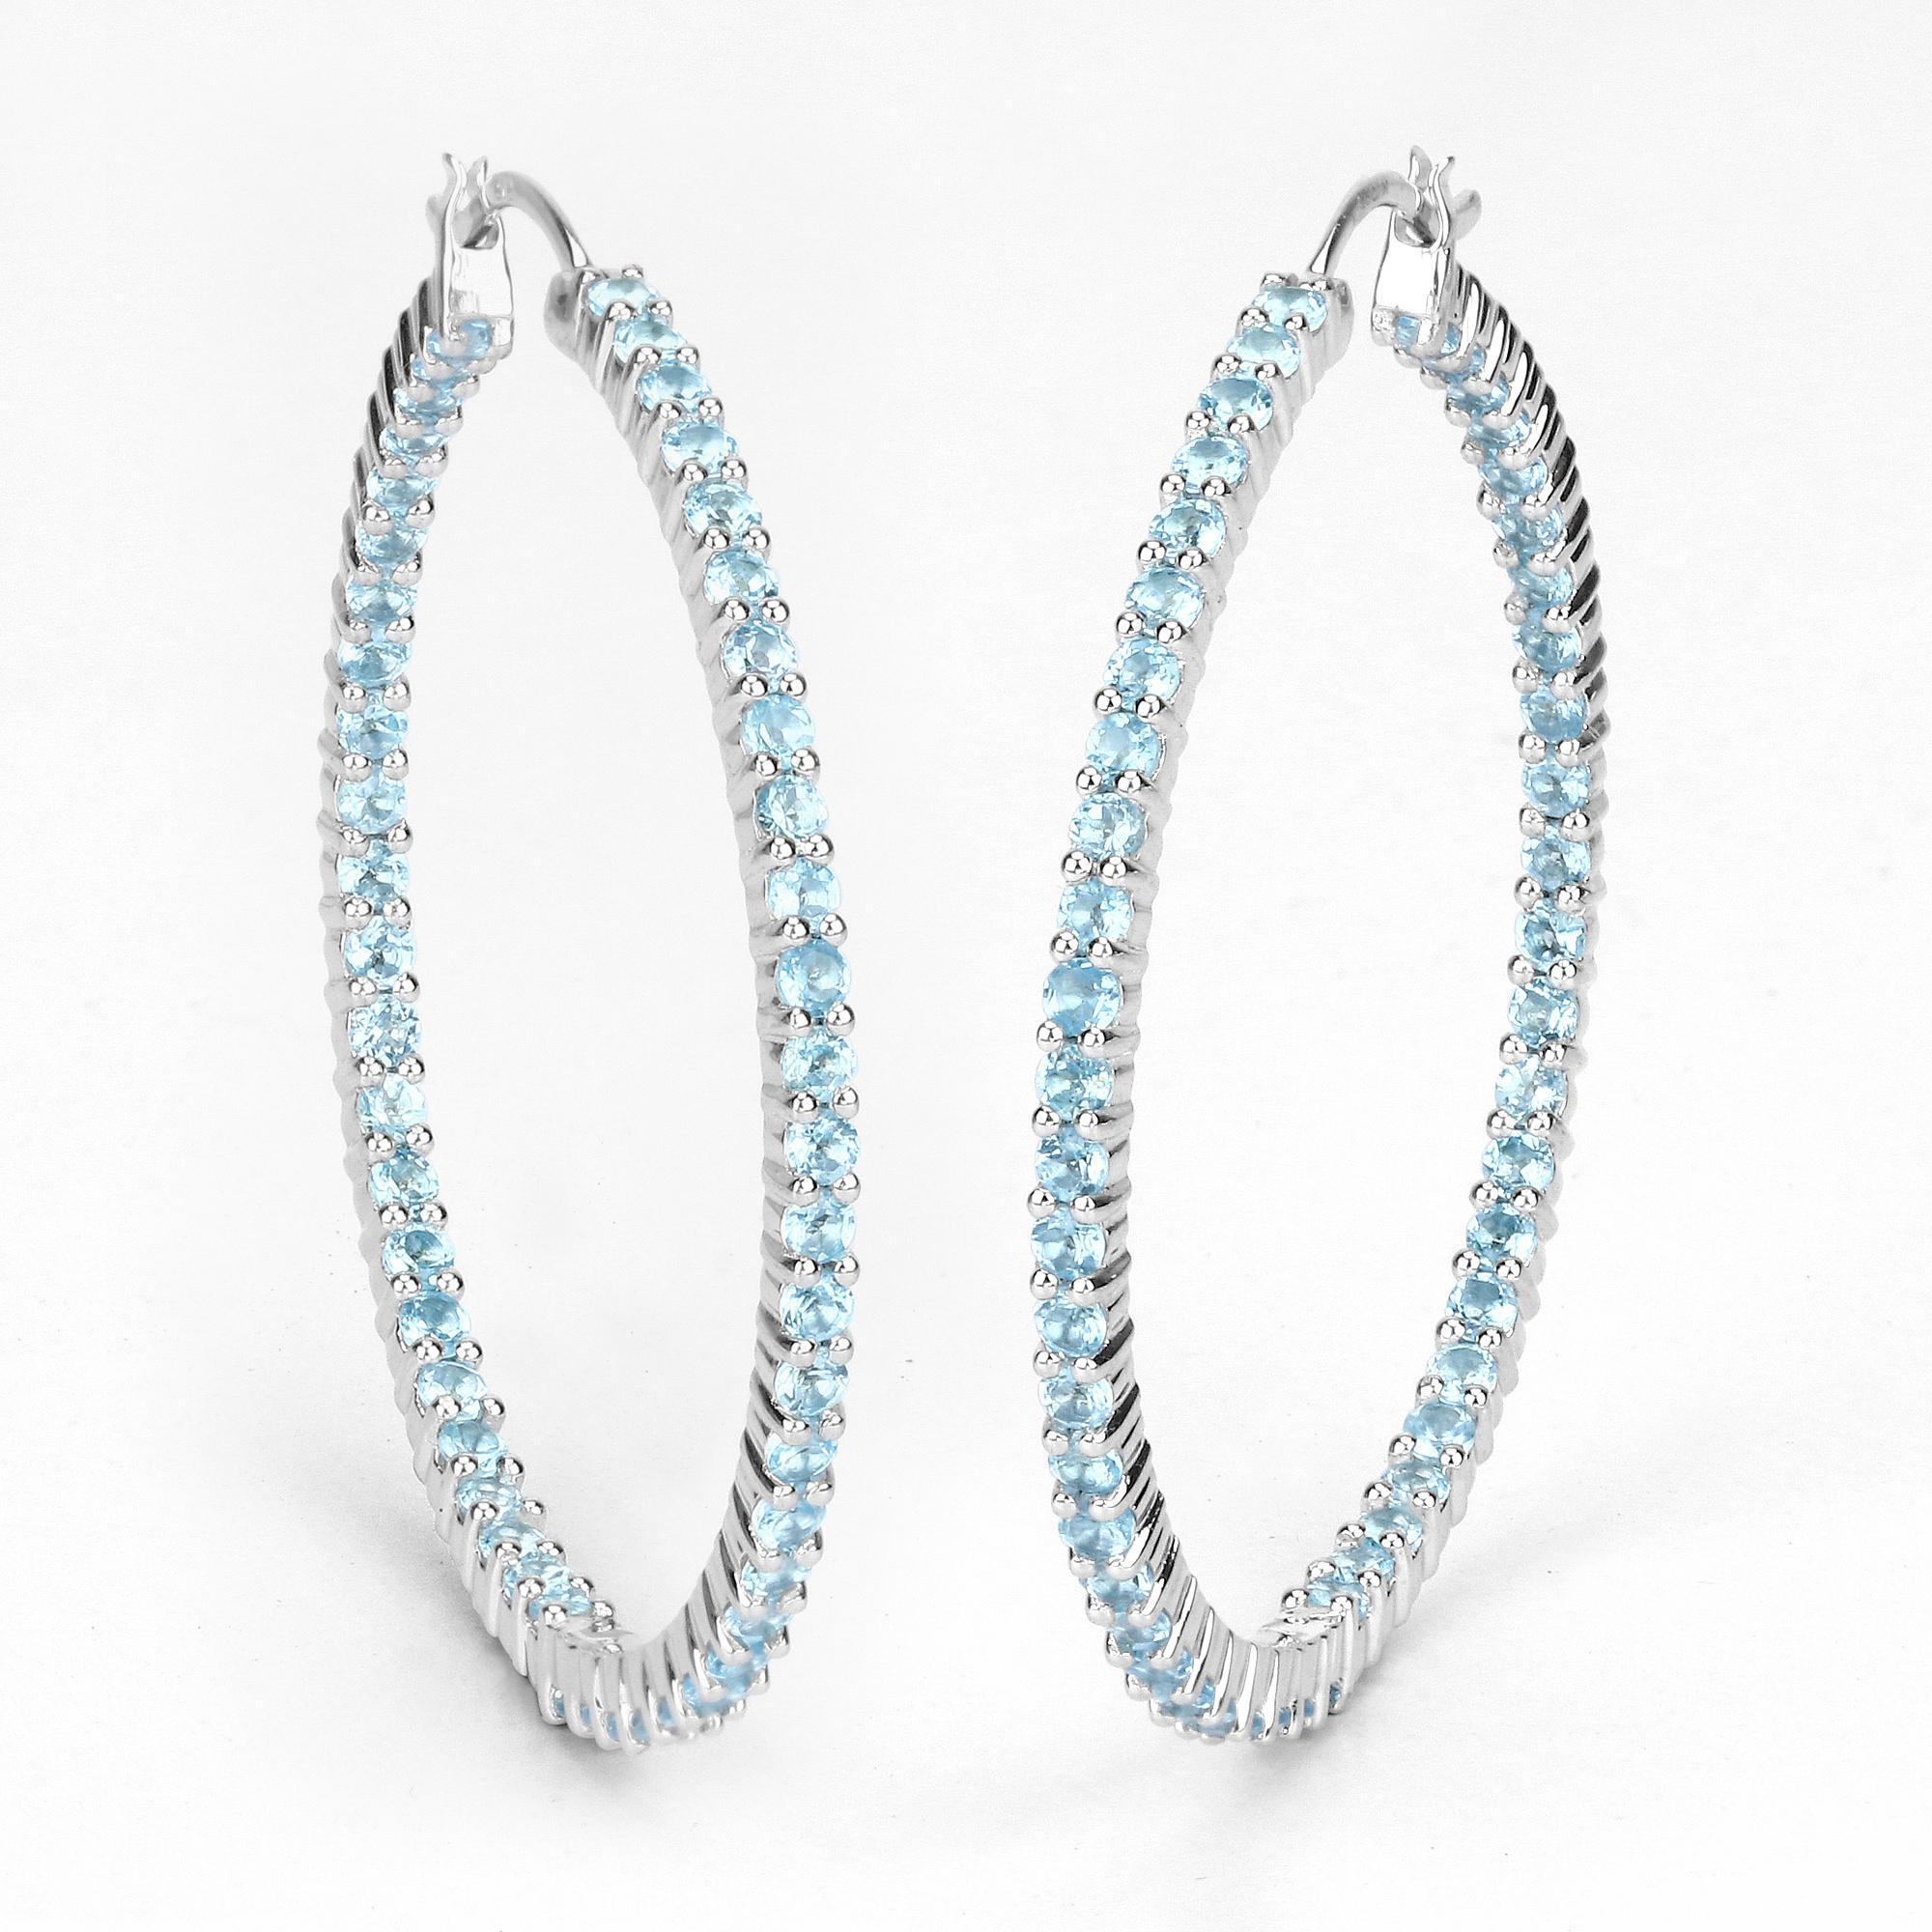 Natural Swiss Blue Topaz Hoop Earrings Total 3.60 Carats Rhodium Plated Silver In Excellent Condition For Sale In Laguna Niguel, CA